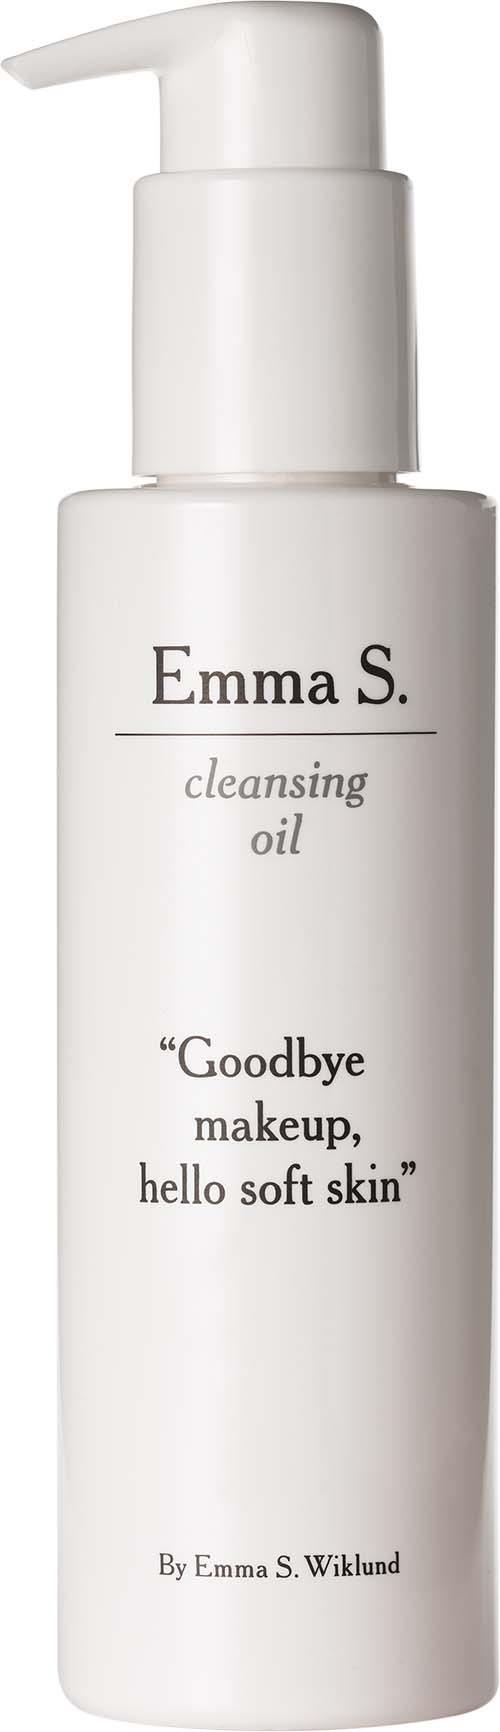 Emma S. Cleansing Oil